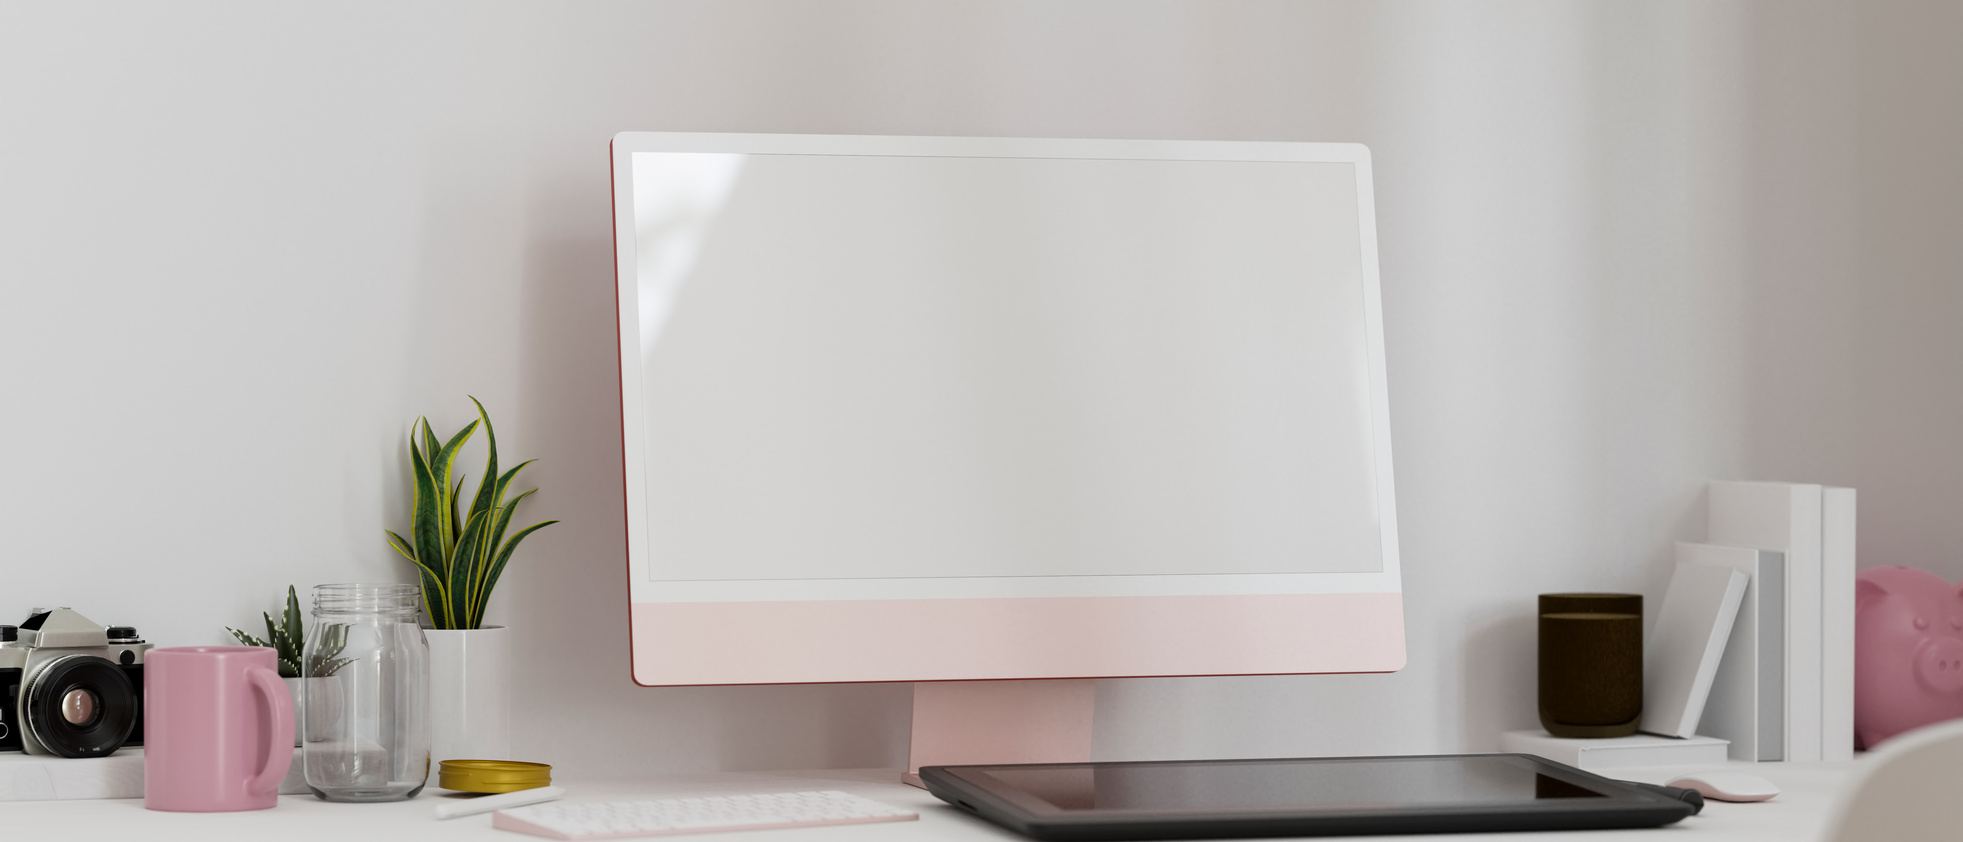 Modern feminine workspace with pink computer and decor